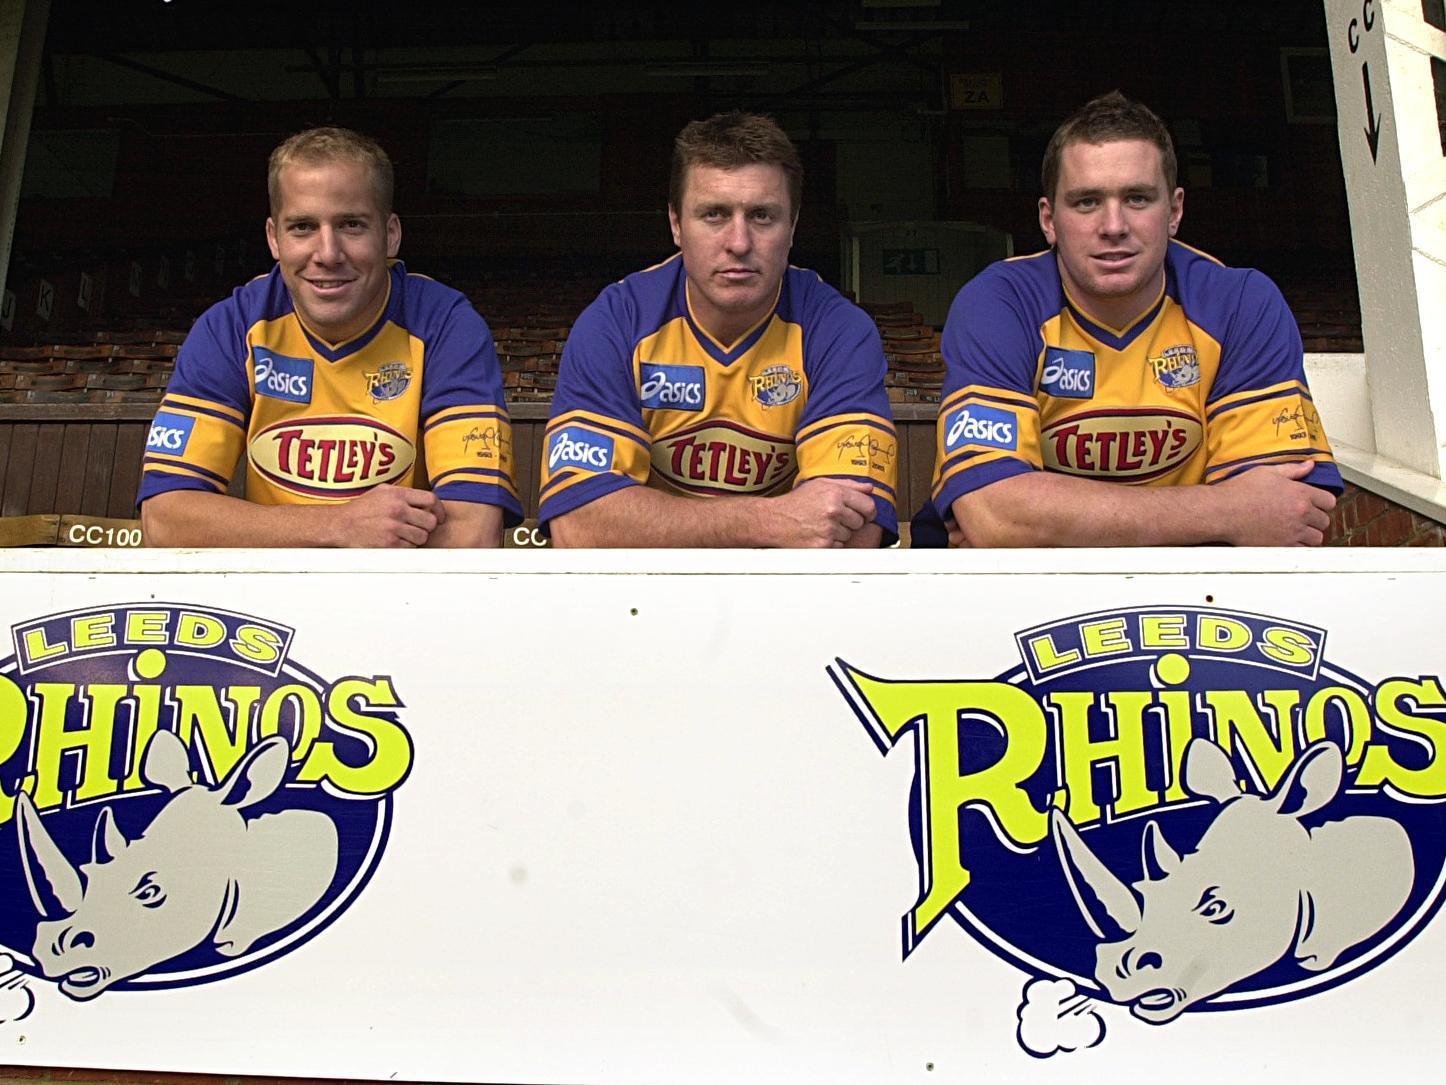 Leeds Rhinos new signings (left to right) were Andrew Dunemann,  David Furner and Chris Feather.